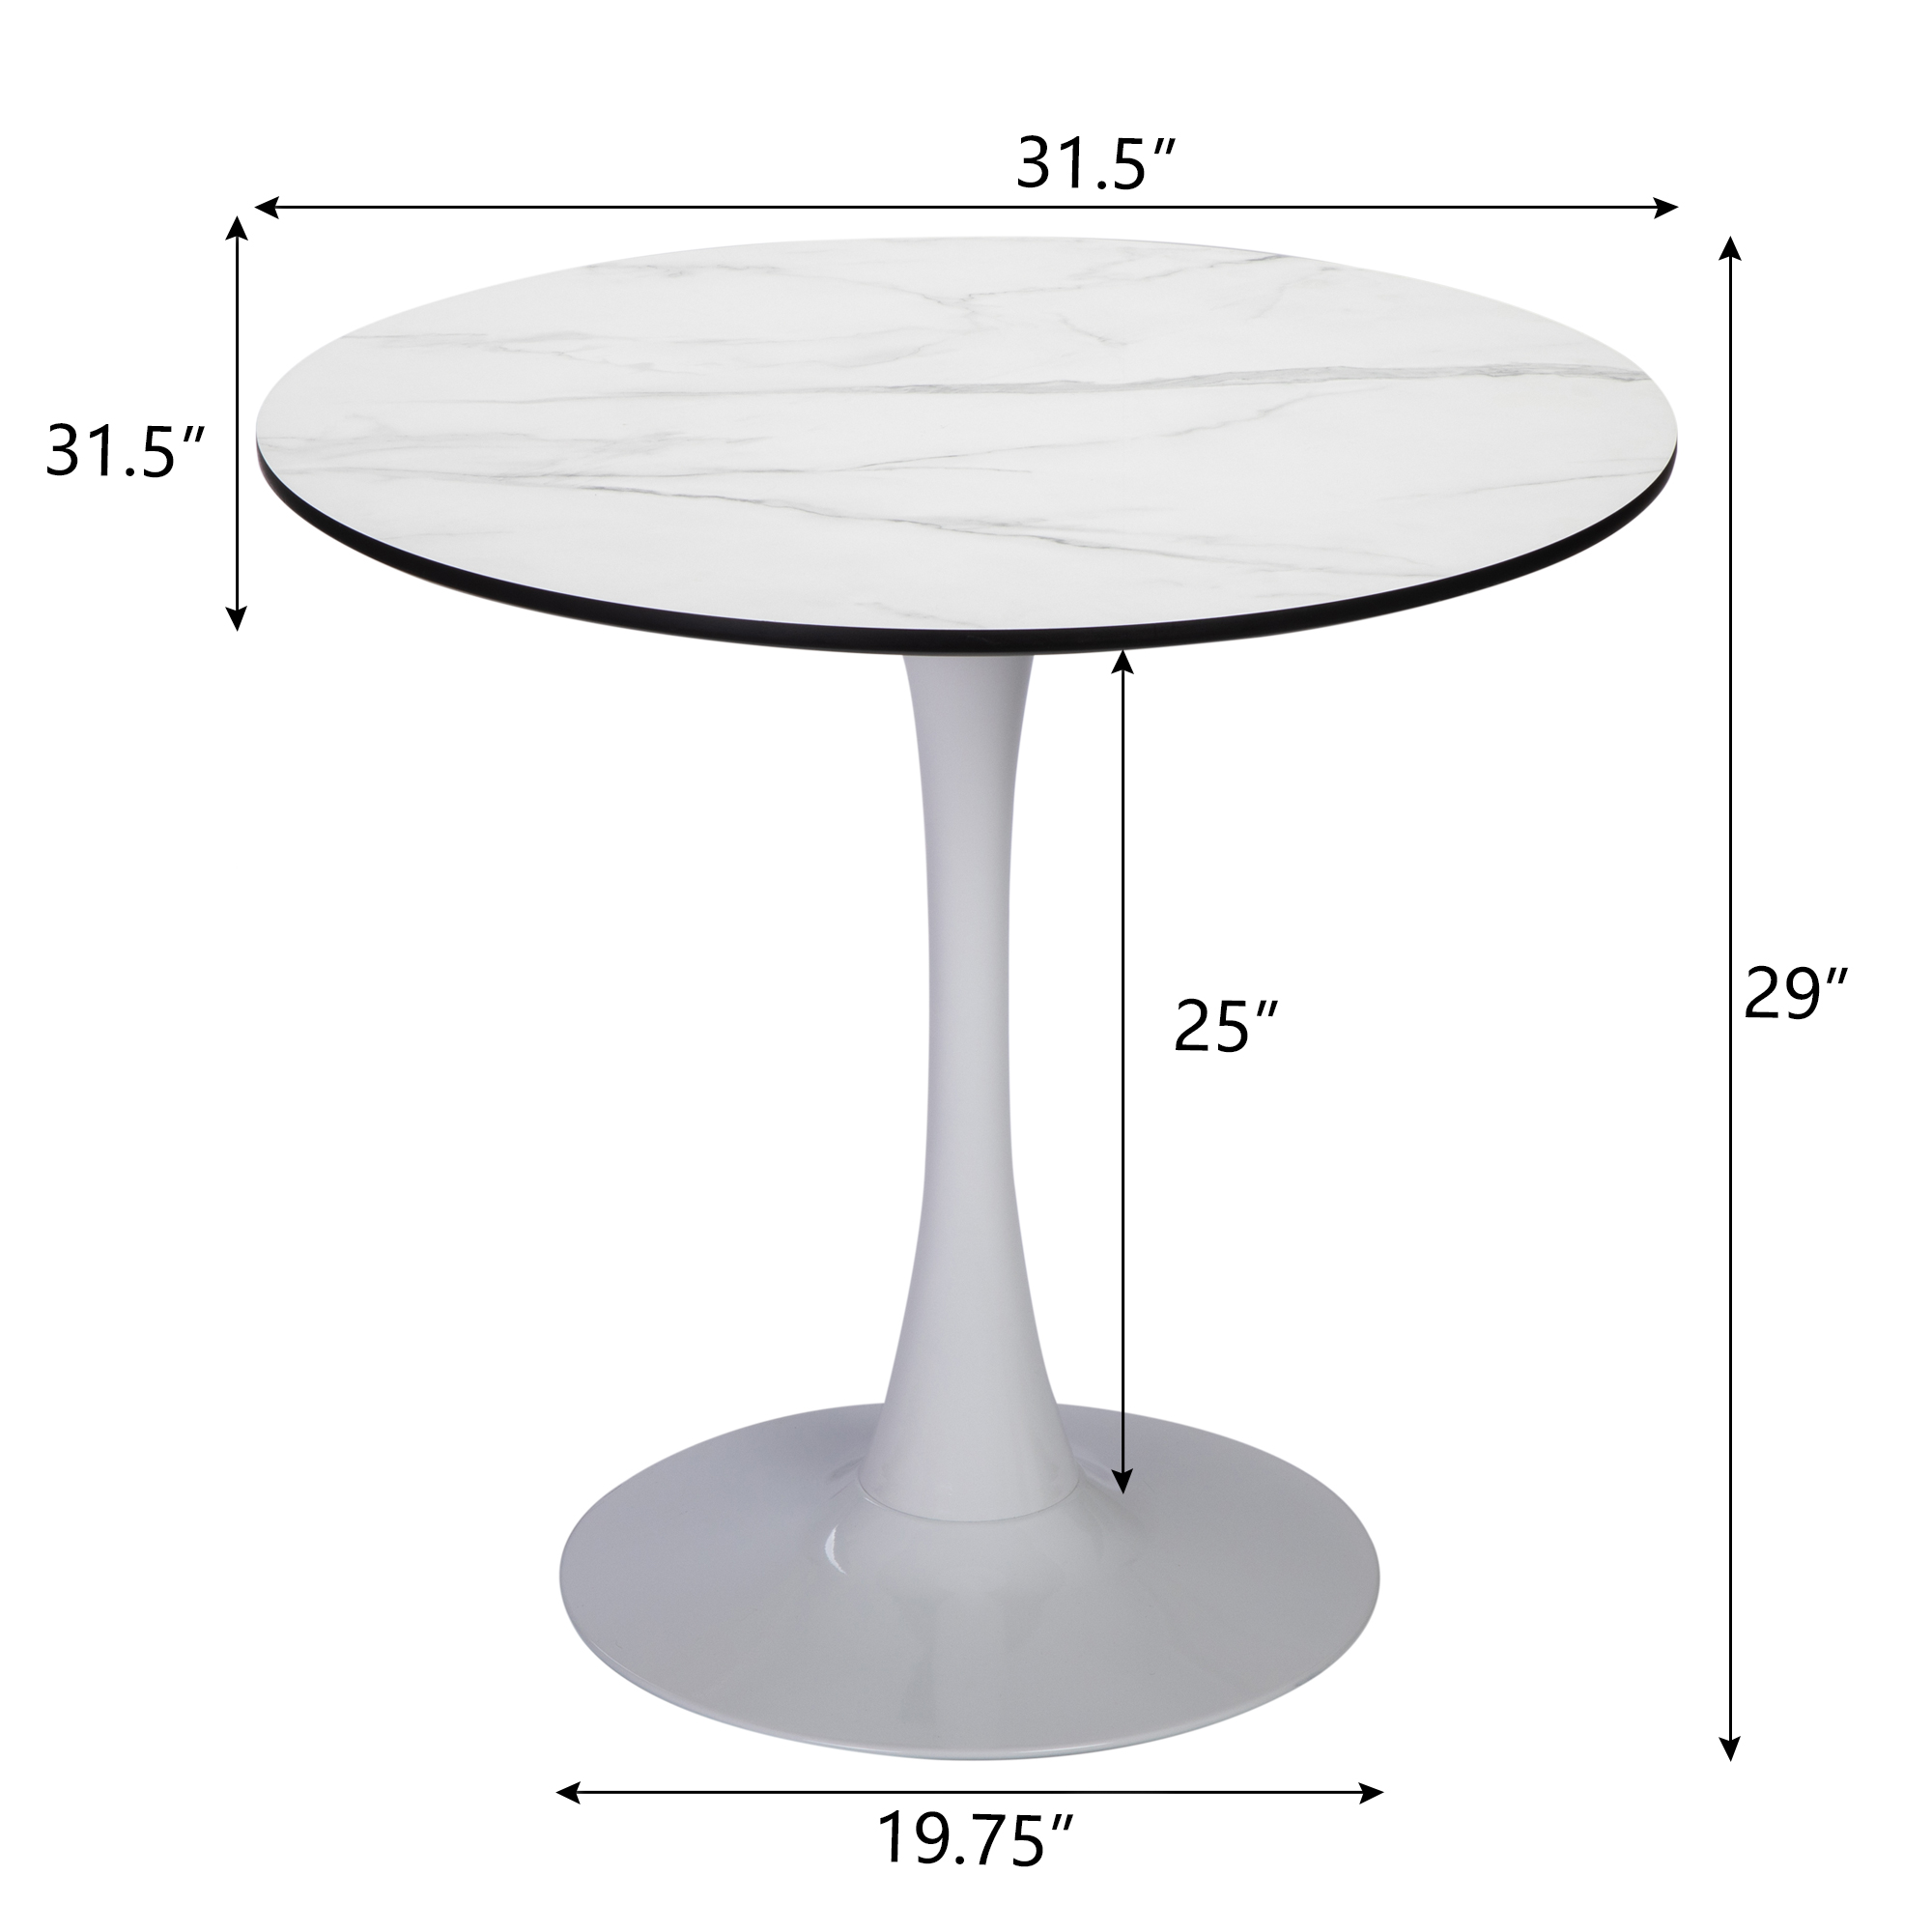 JAXSUNNY Round Dining Table for 1-4 People, Modern Tulip Table with Faux Marble Texture, End Table, Leisure Coffee Table -White